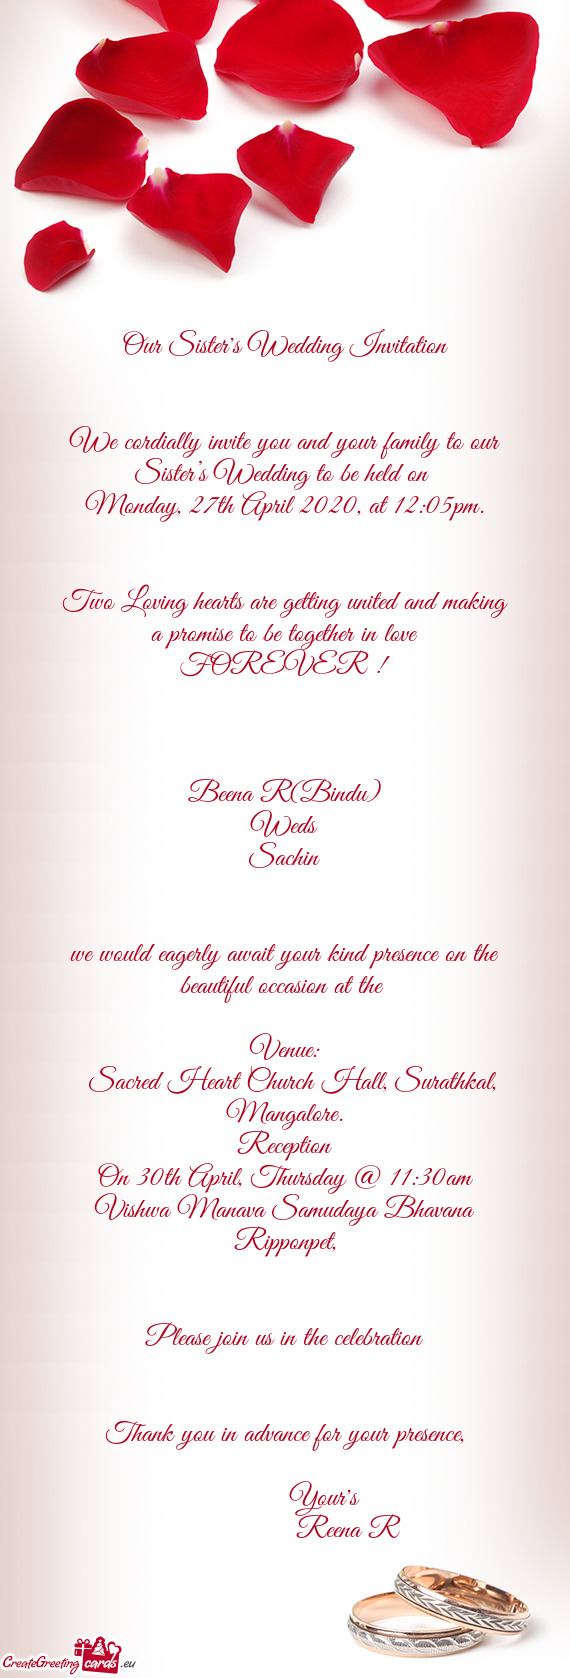 We cordially invite you and your family to our Sister’s Wedding to be held on